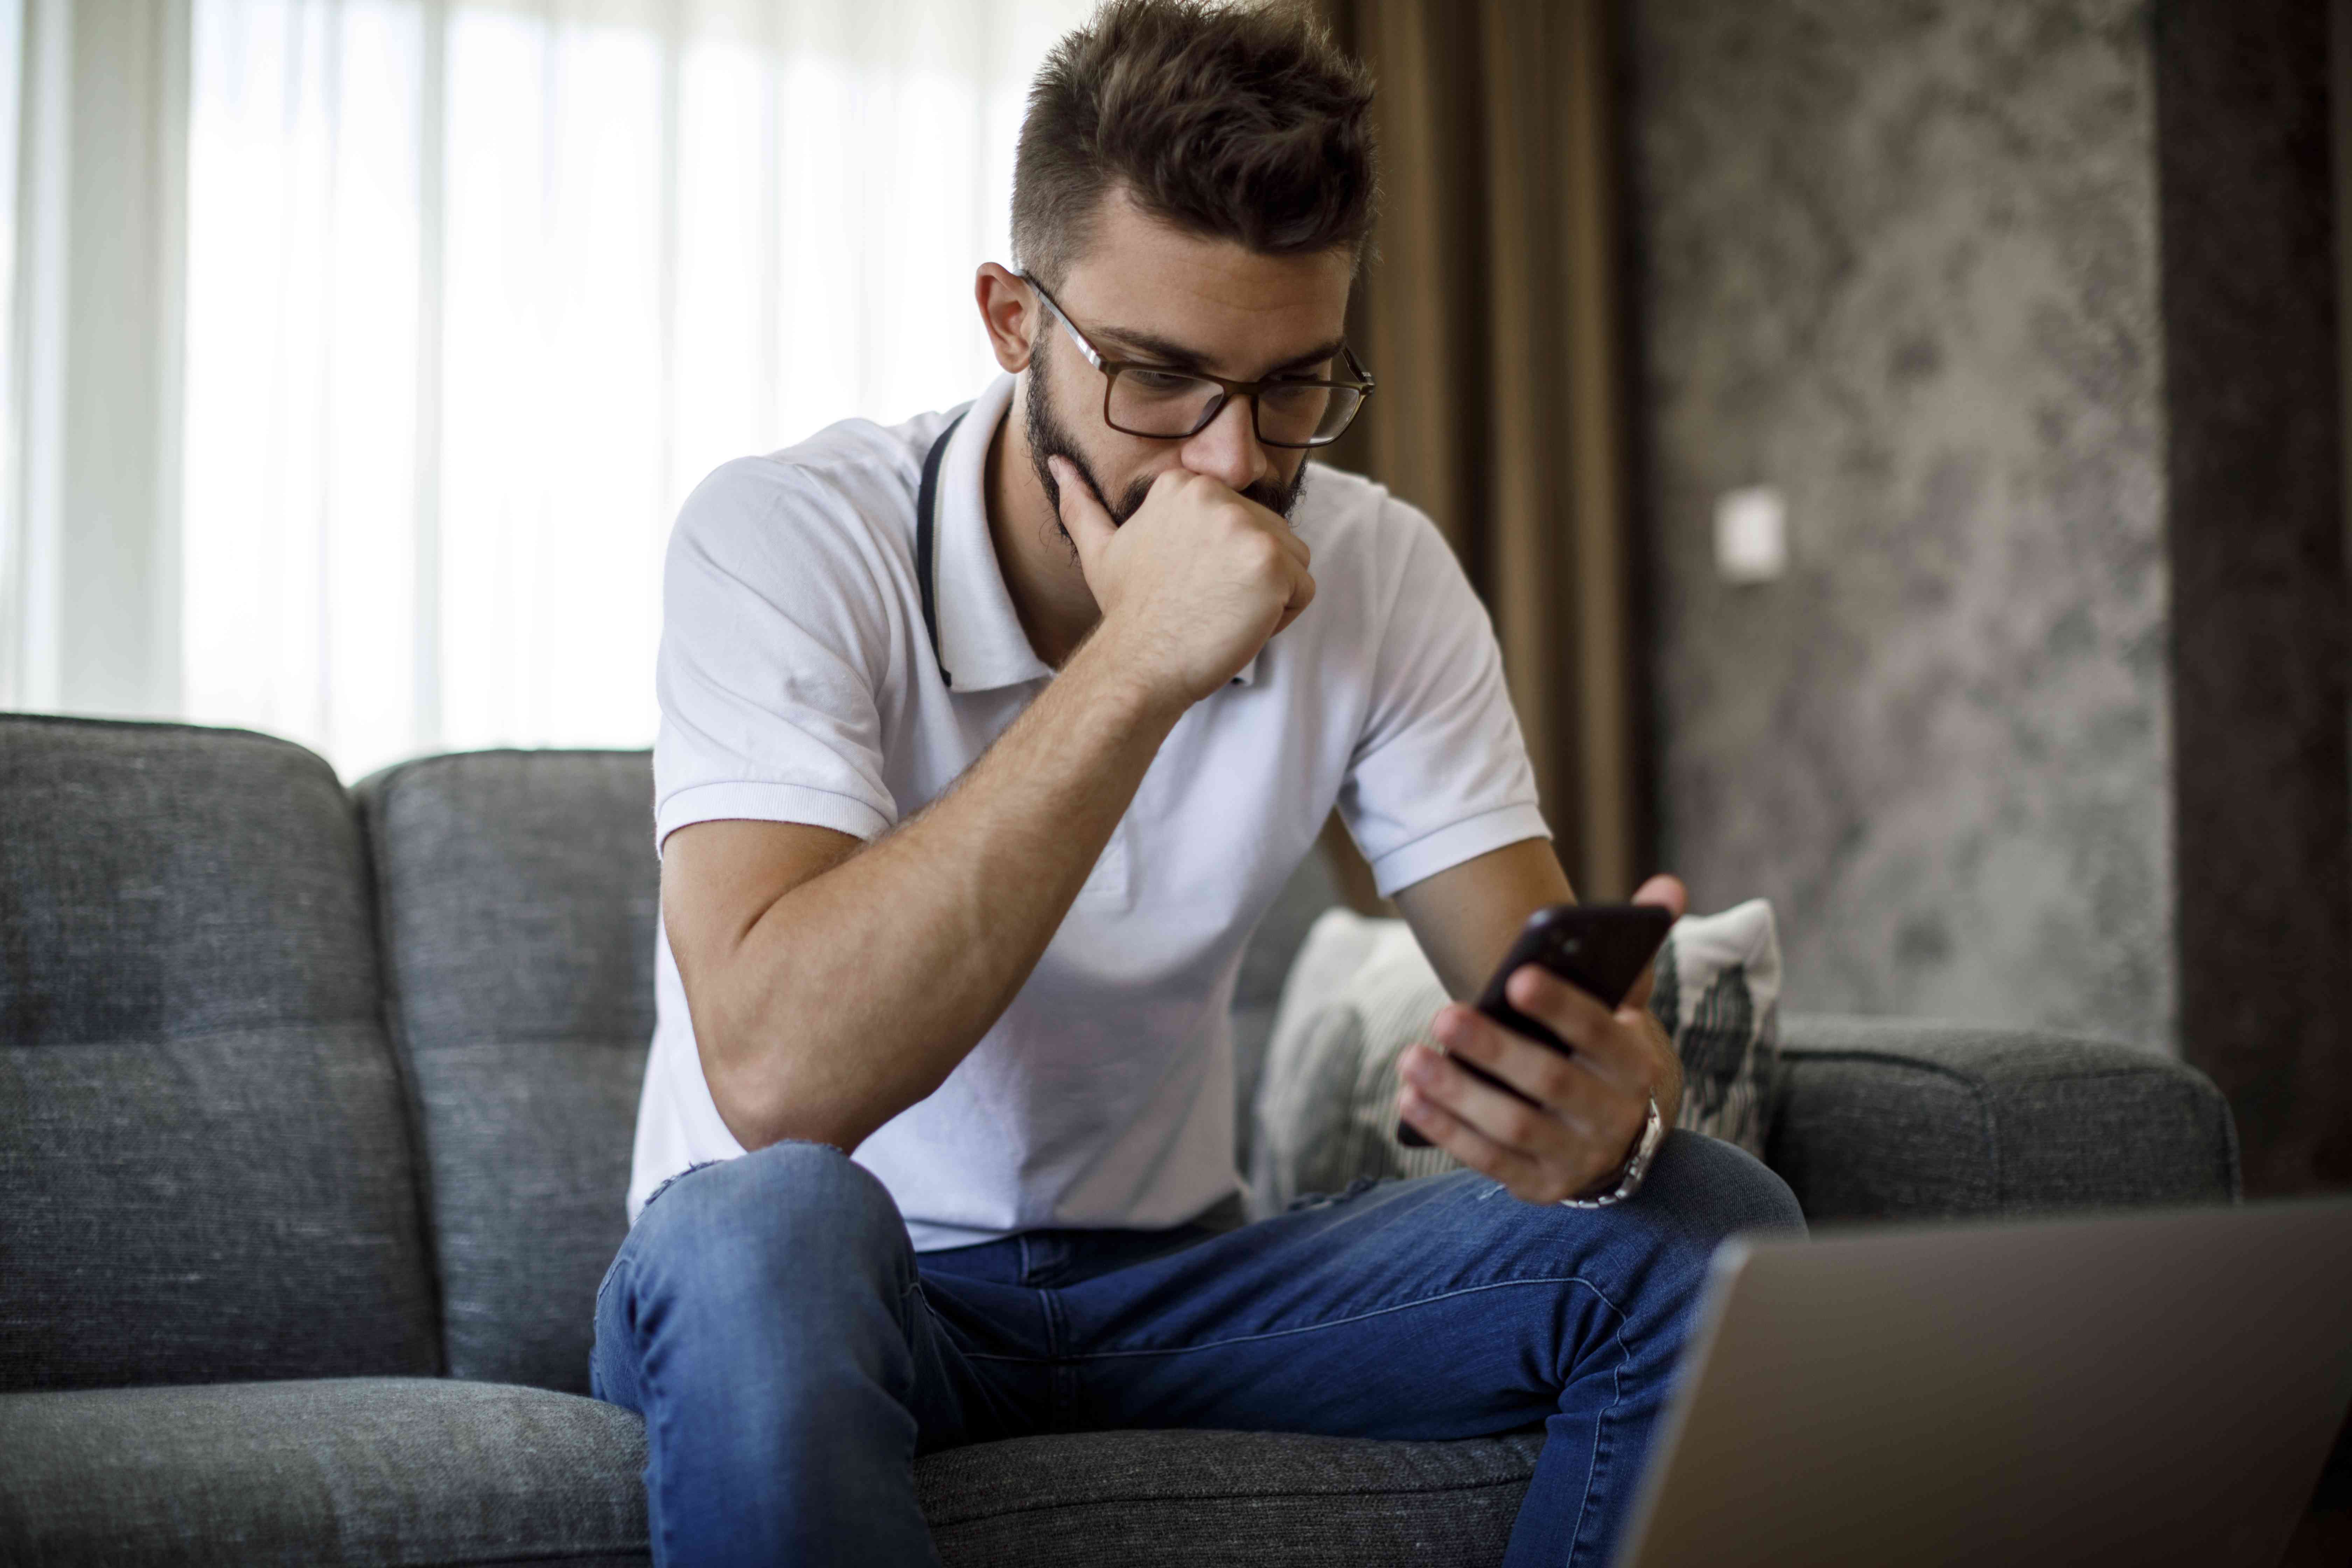 Young man sitting on living room couch and looking intently at his smartphone